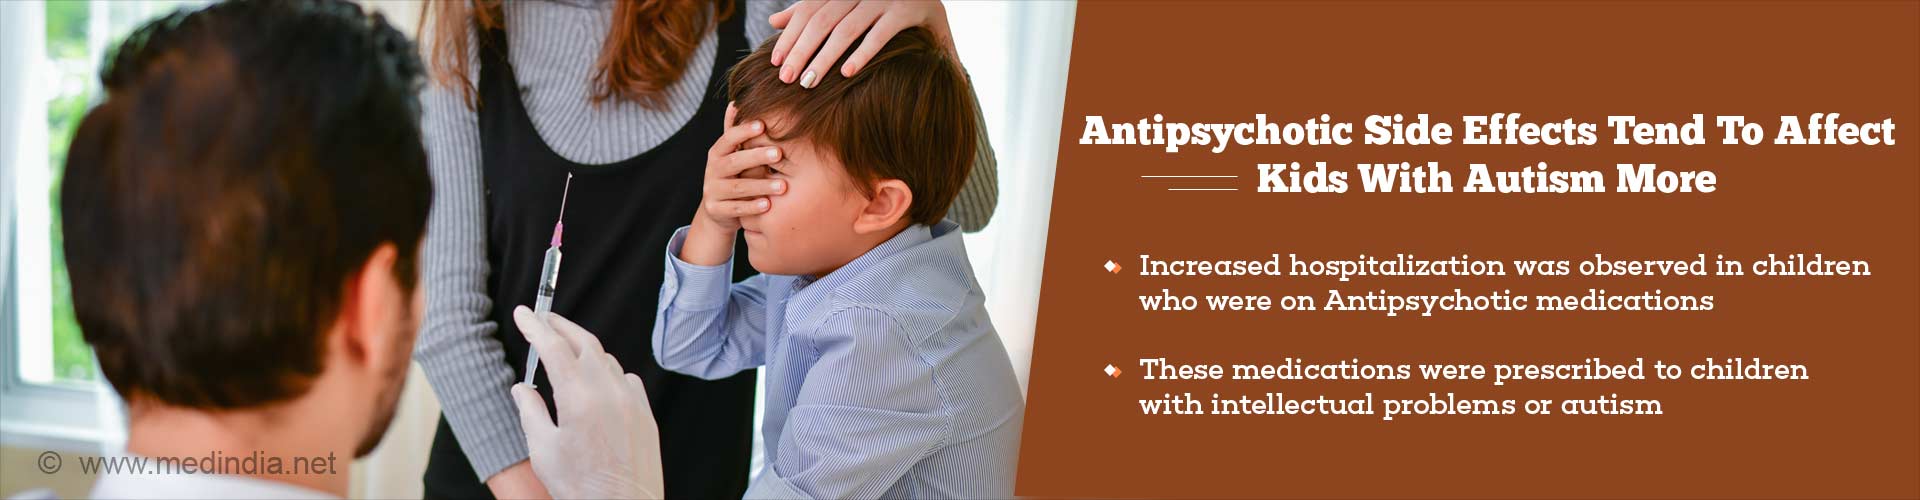 anitpsychotic side effects tend to affect kids with autism more
- increased hospitalization was observed in children who were on antipsychotic medications
- these medications were prescribed to children with intellectual problems or autism